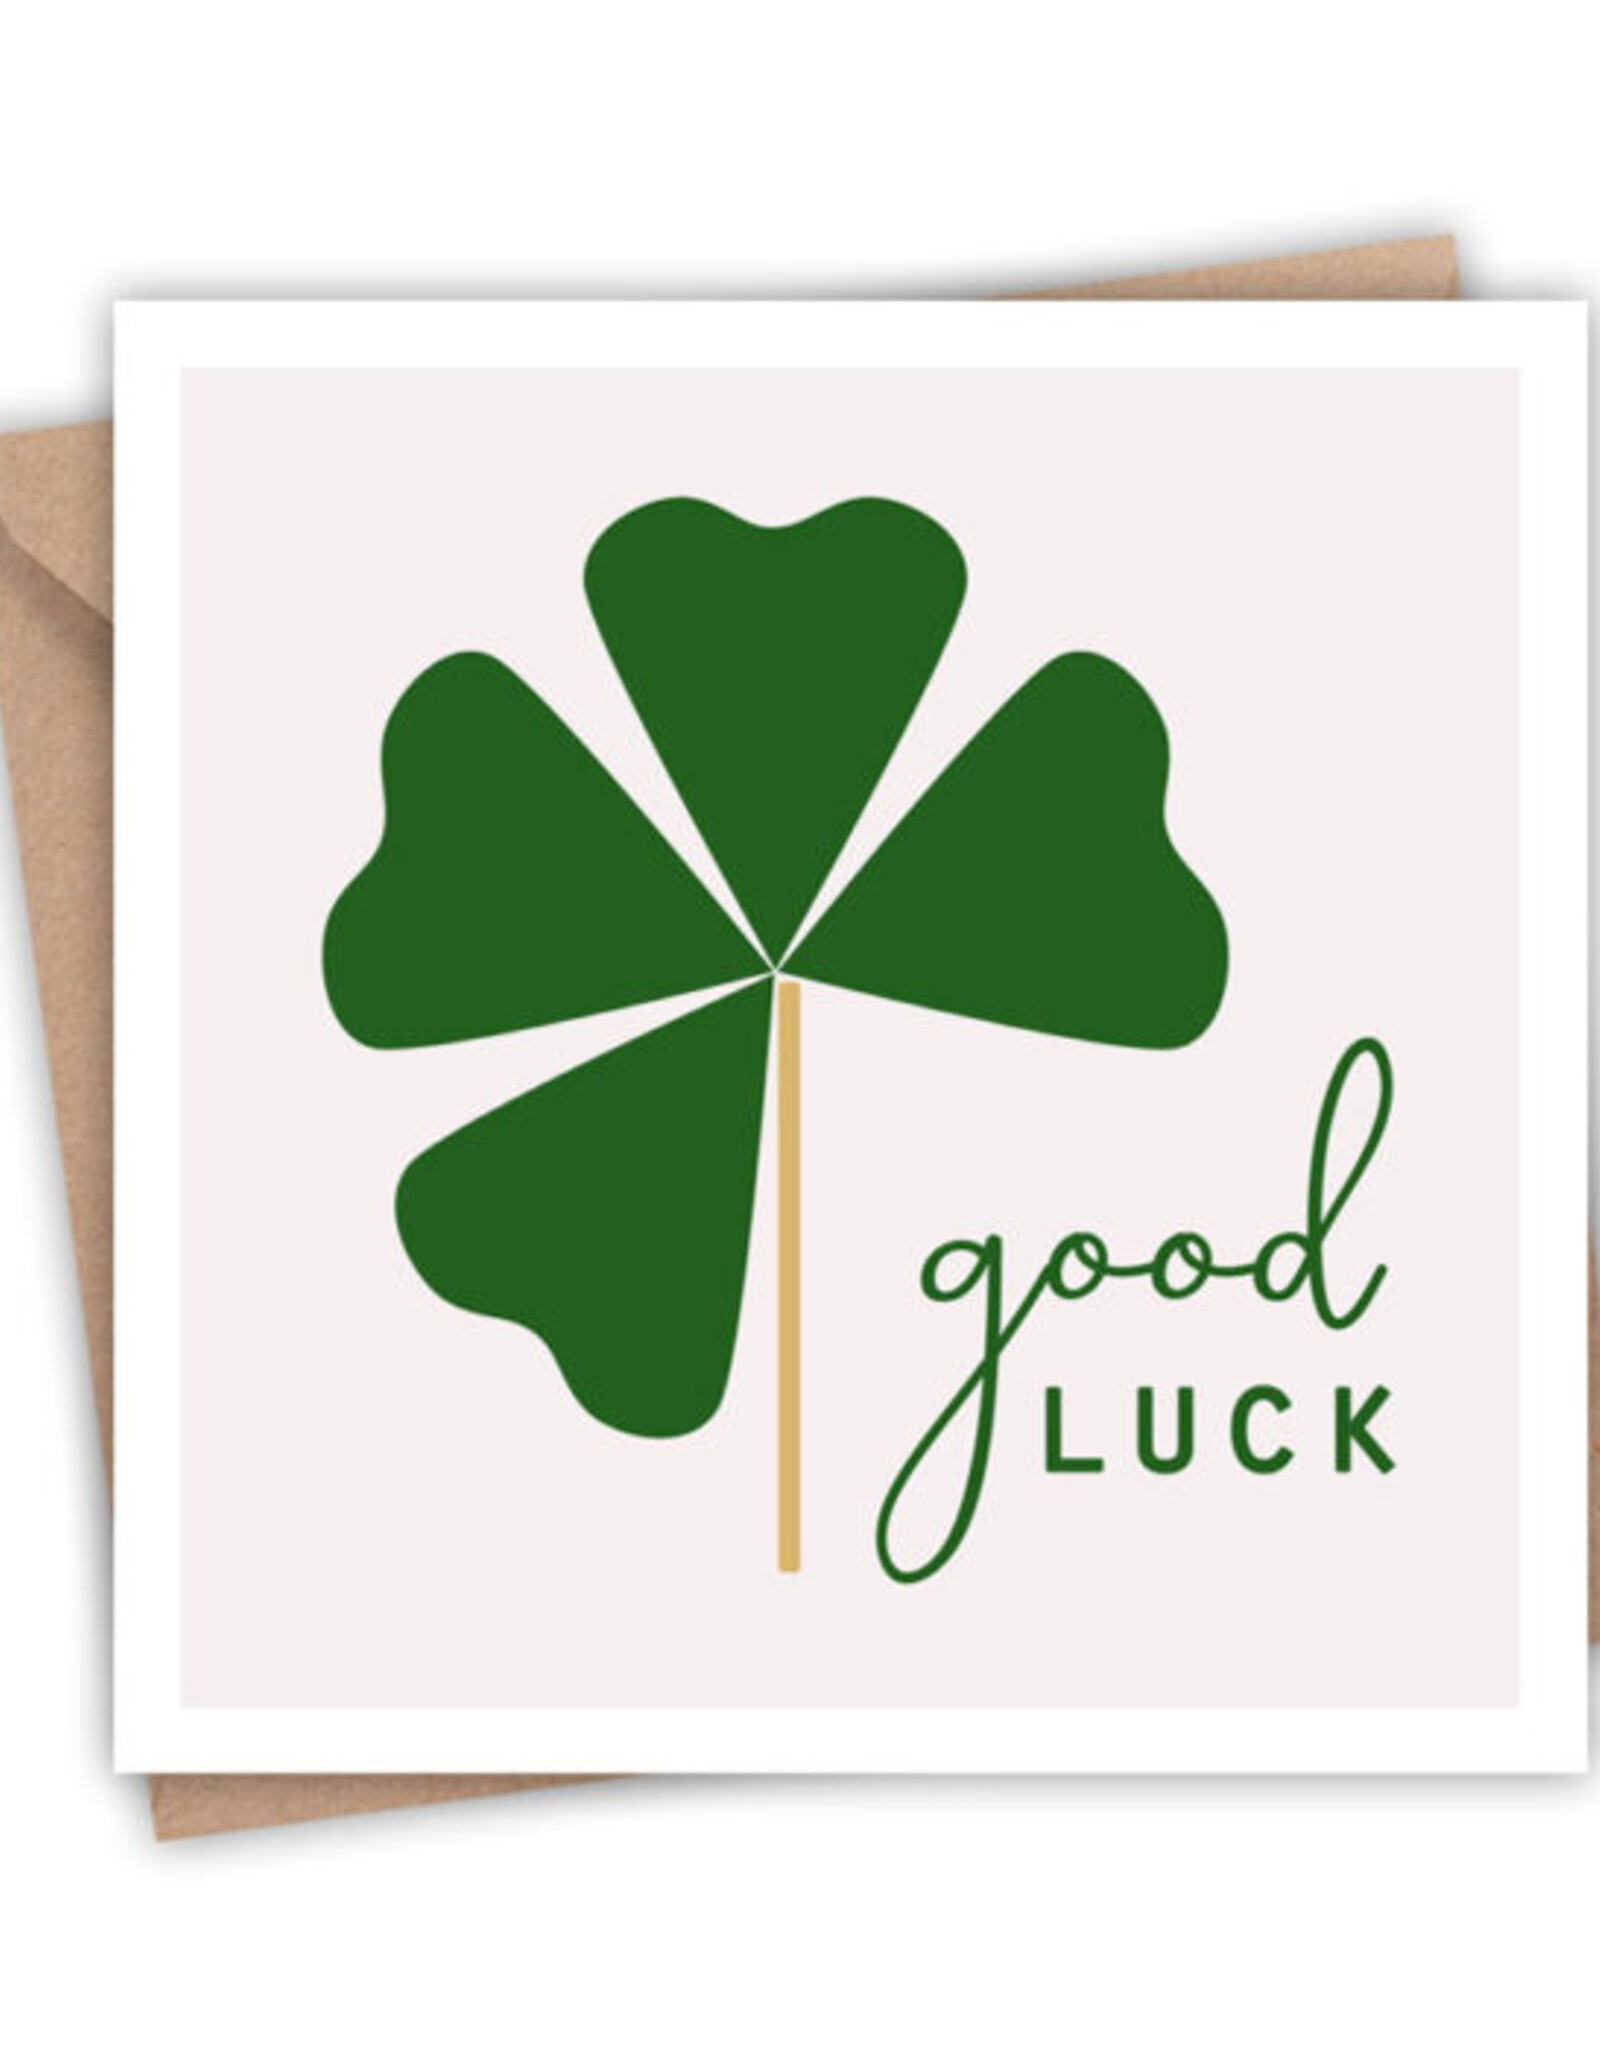 LAINEY K Wishing You Good Luck Card